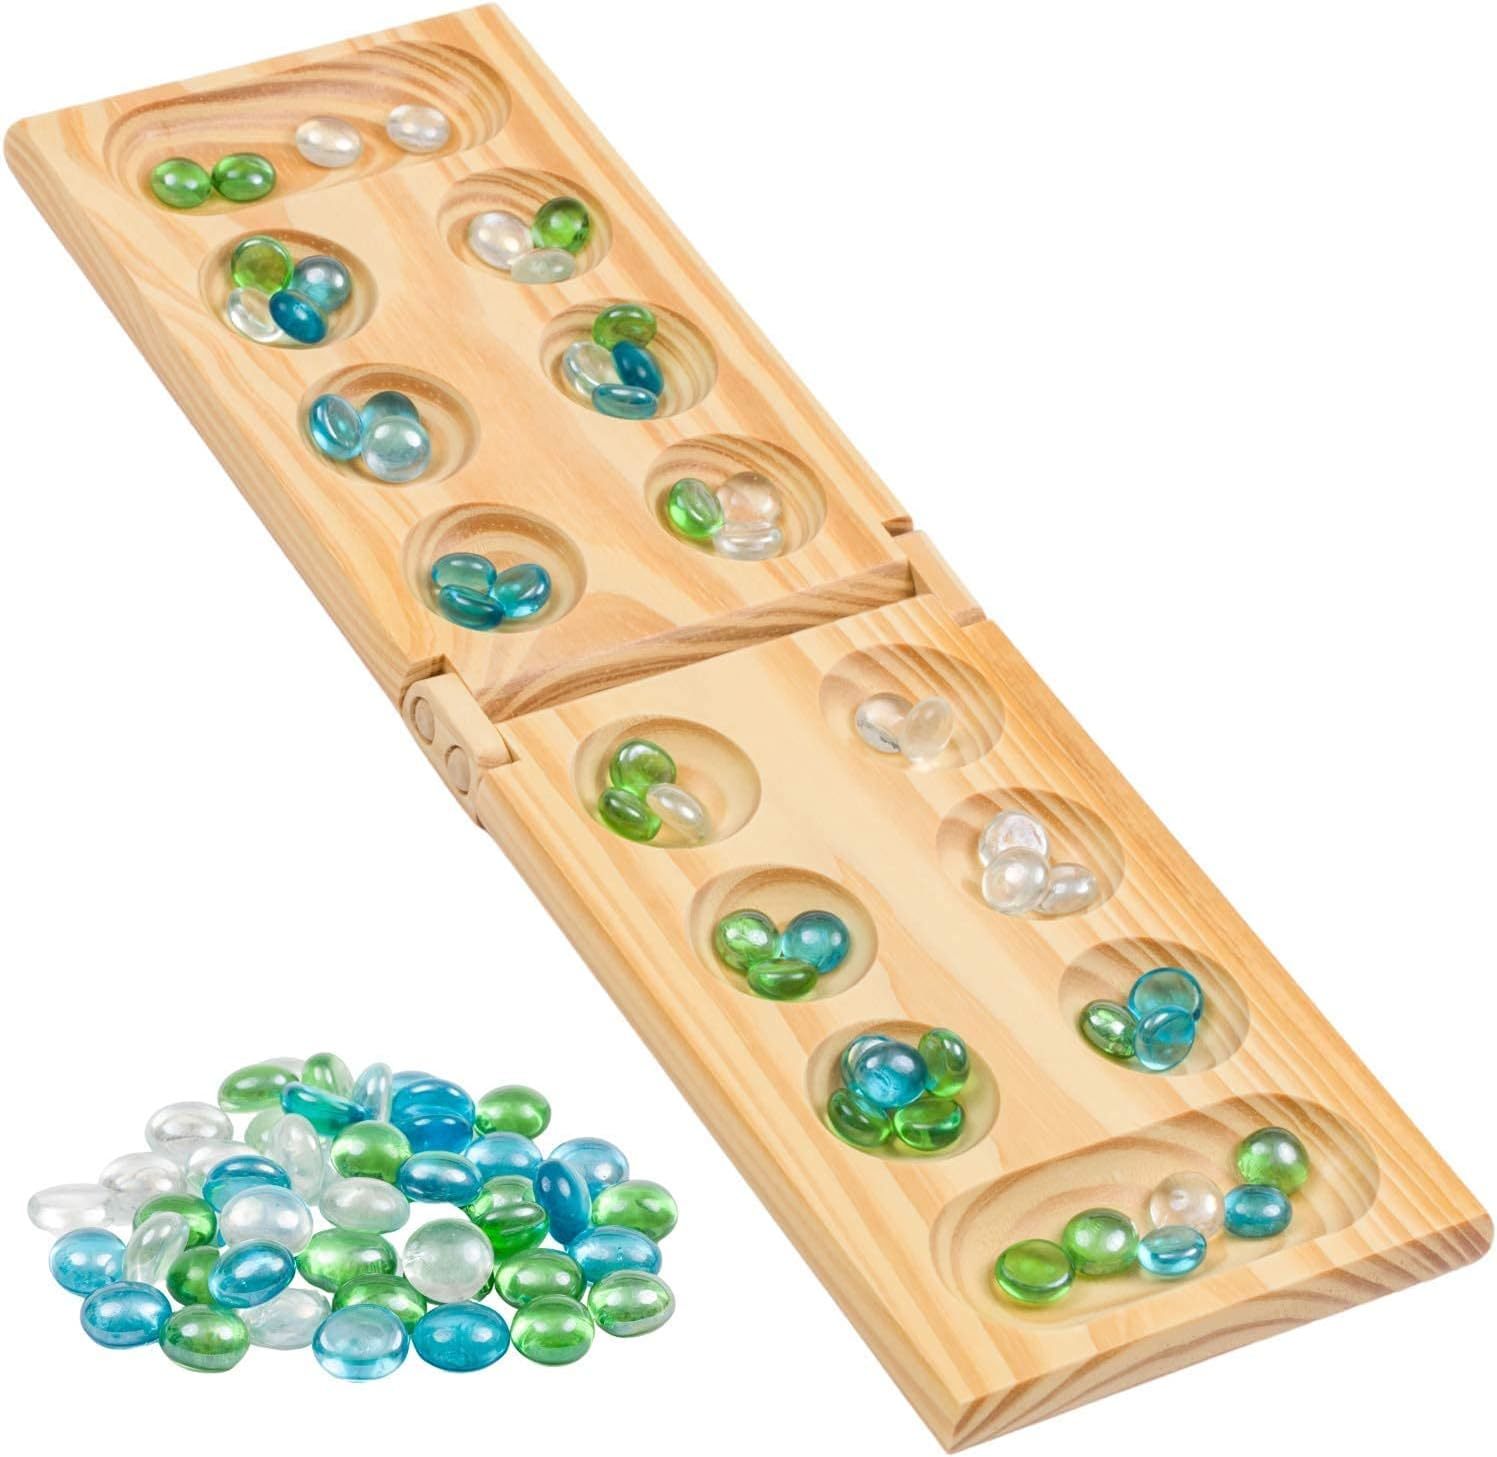 Primary image for Mancala Board Game Fun Classic Table Game with Wooden Board for Adults Kids 48 G